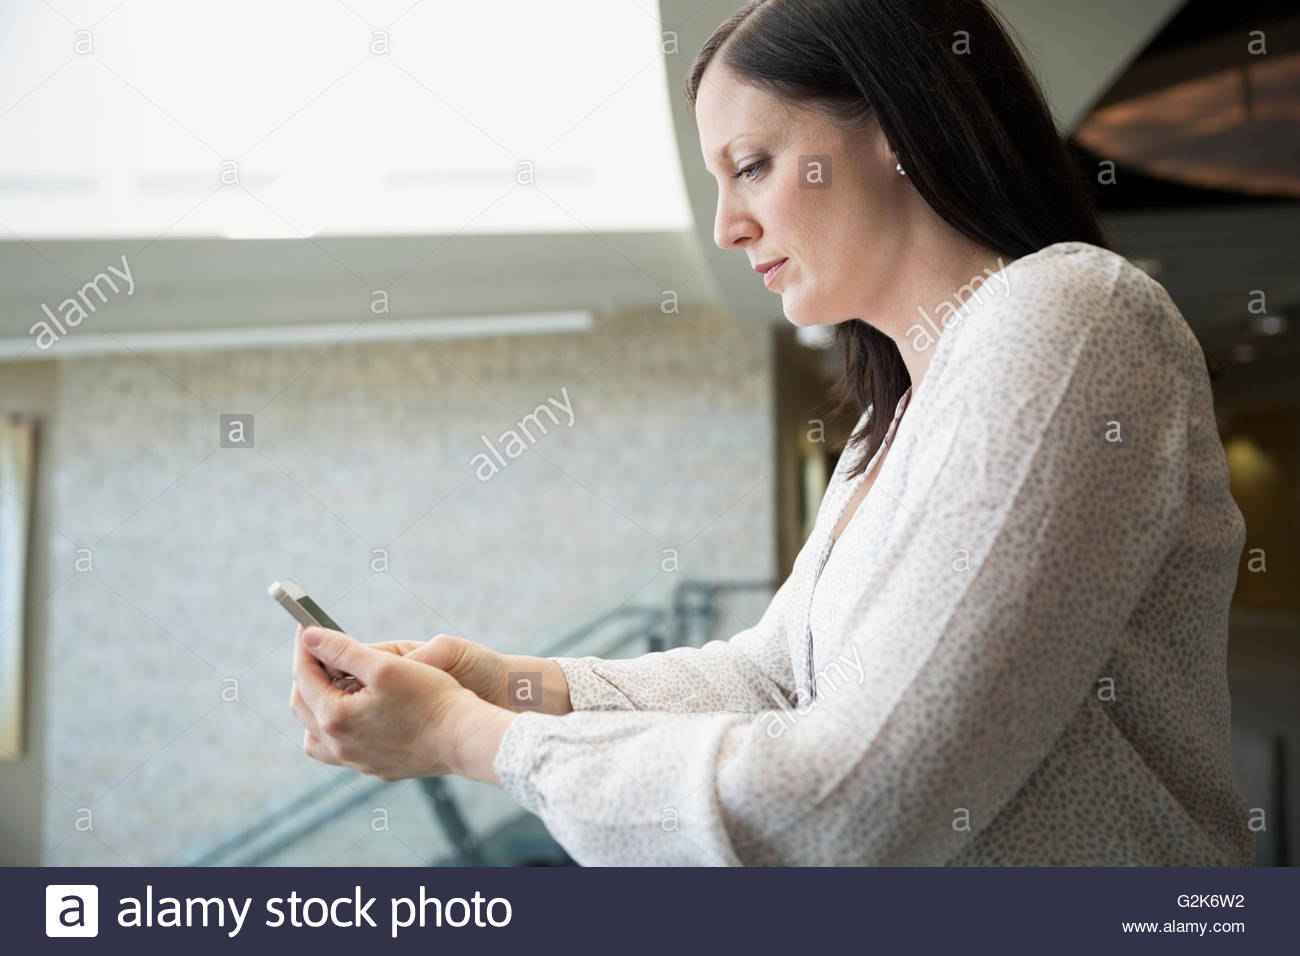 Grave donna texting Foto Stock